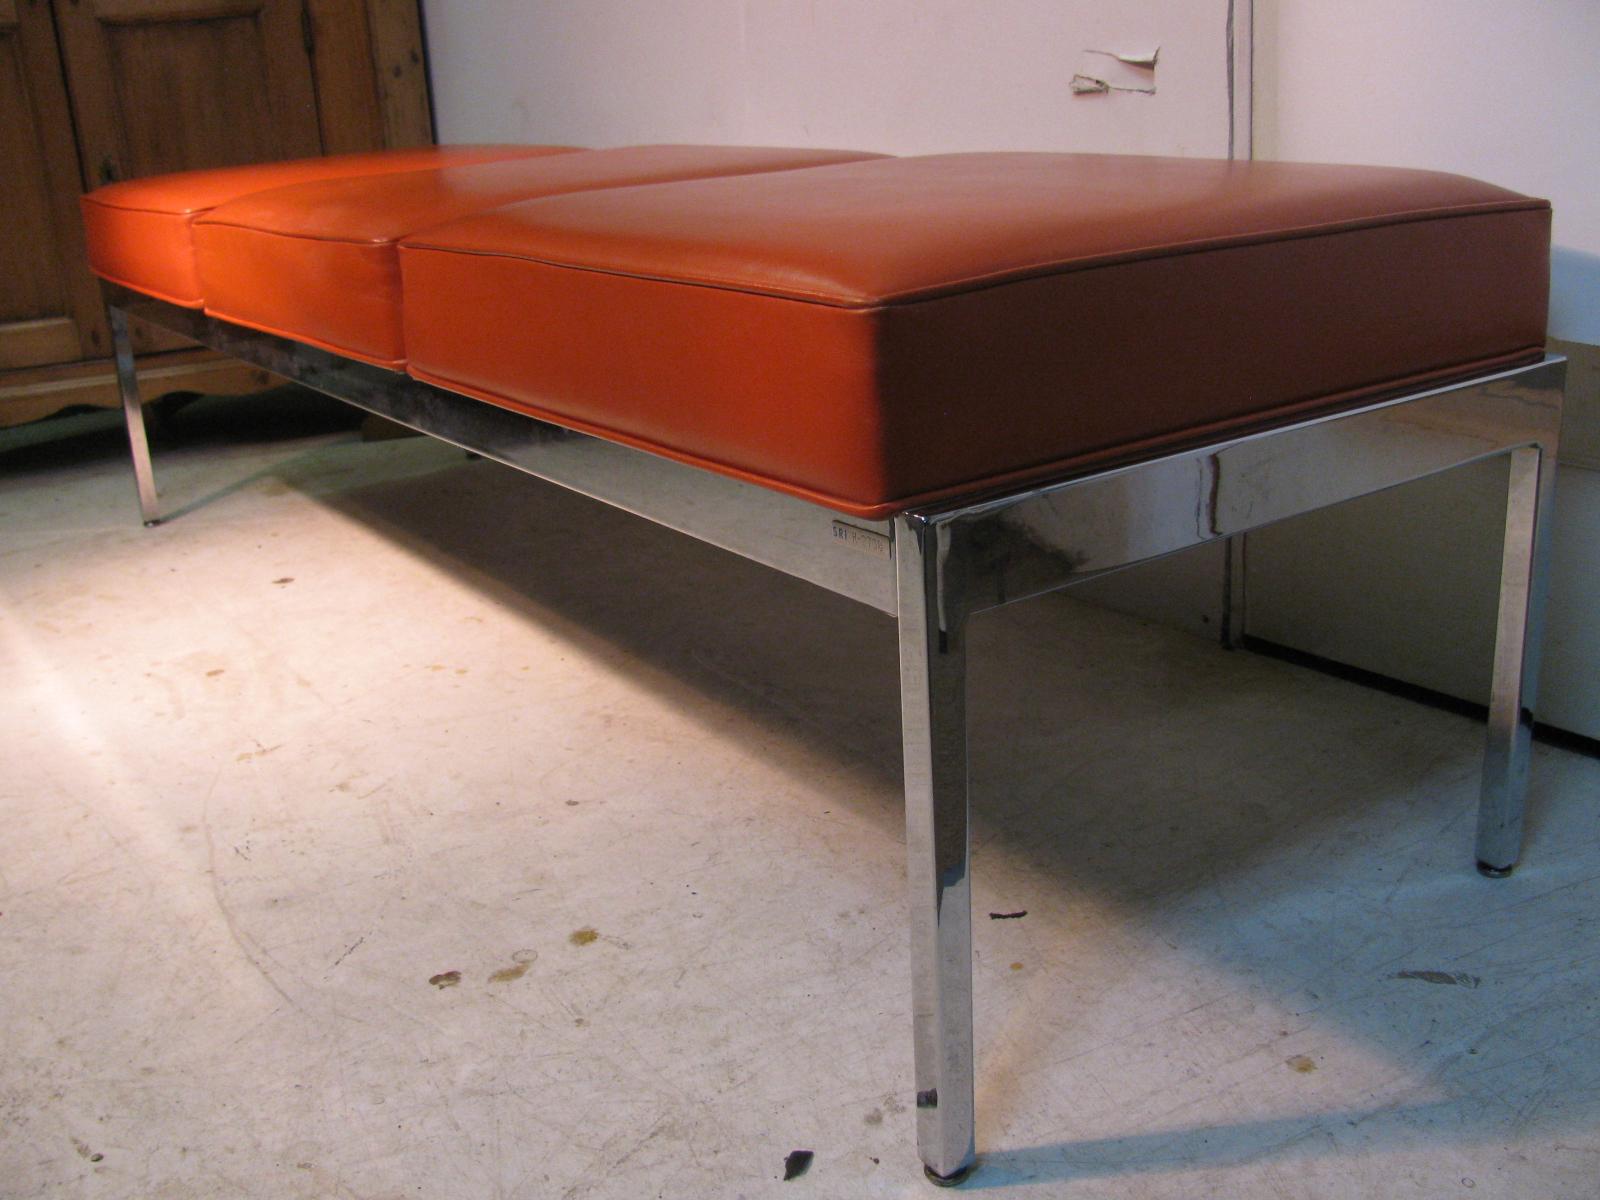 Wonderful pair of Steelcase 3-seat benches in orange vinyl. Mid-late 1960s is the time frame and in excellent vintage condition with only a tiny speck of damage on the vinyl. Measures: 69 x 22 x 18.5 H are the dimensions so they have good size.